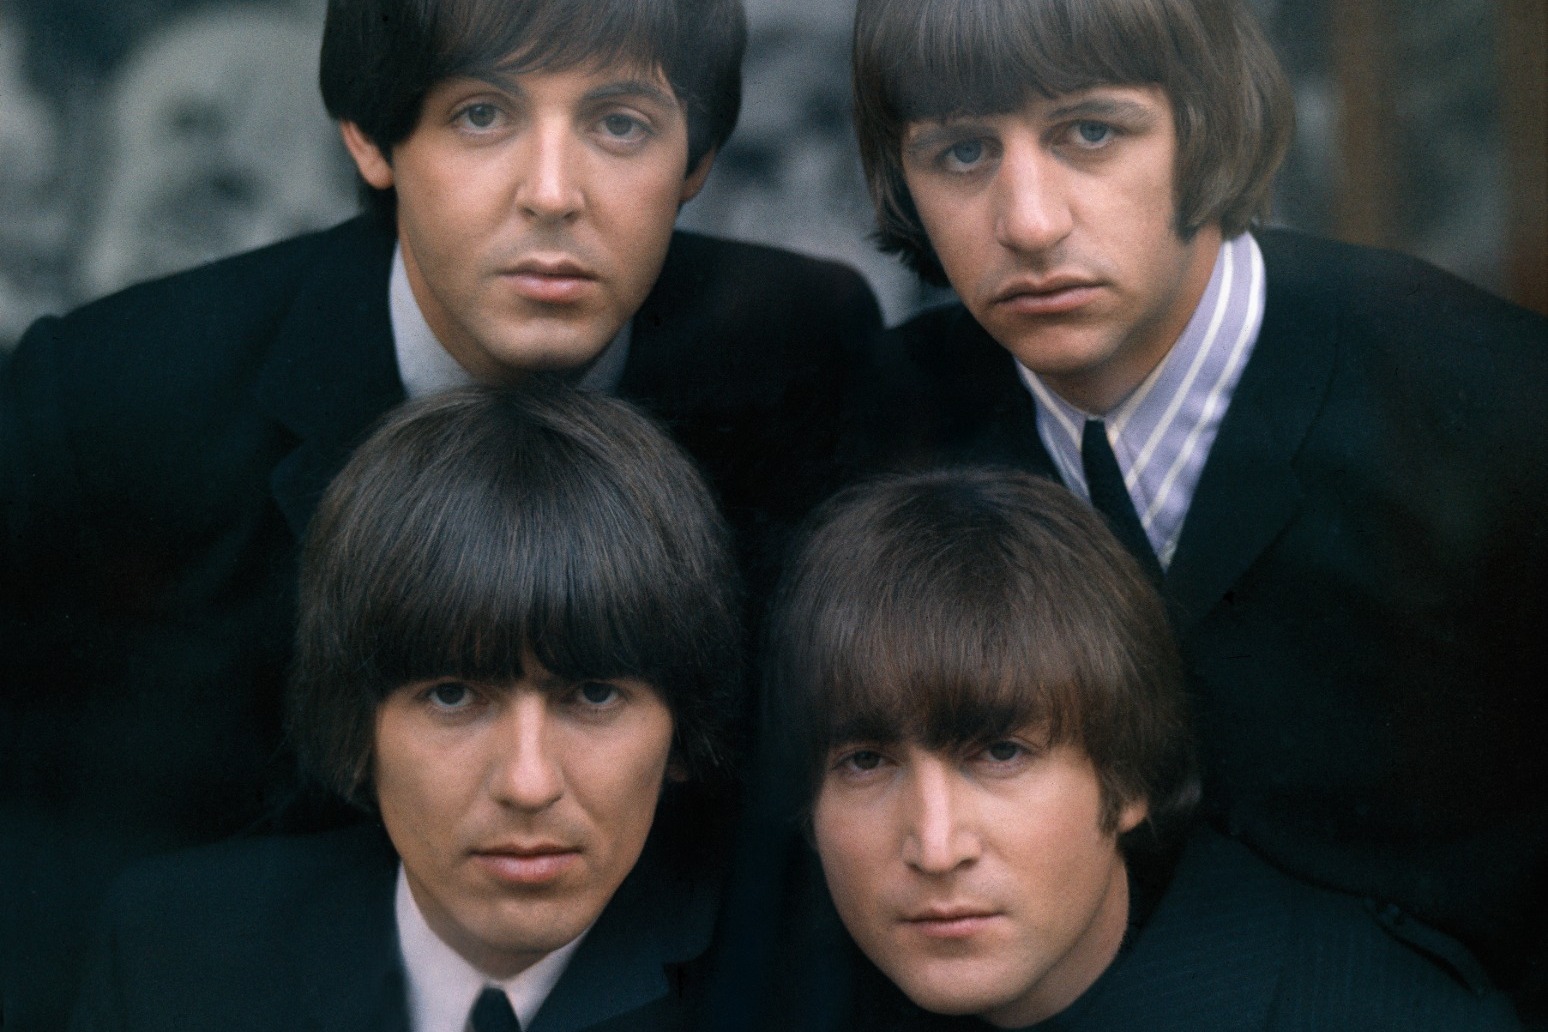 The Beatles’ Now And Then on track to become band’s 18th number one single 